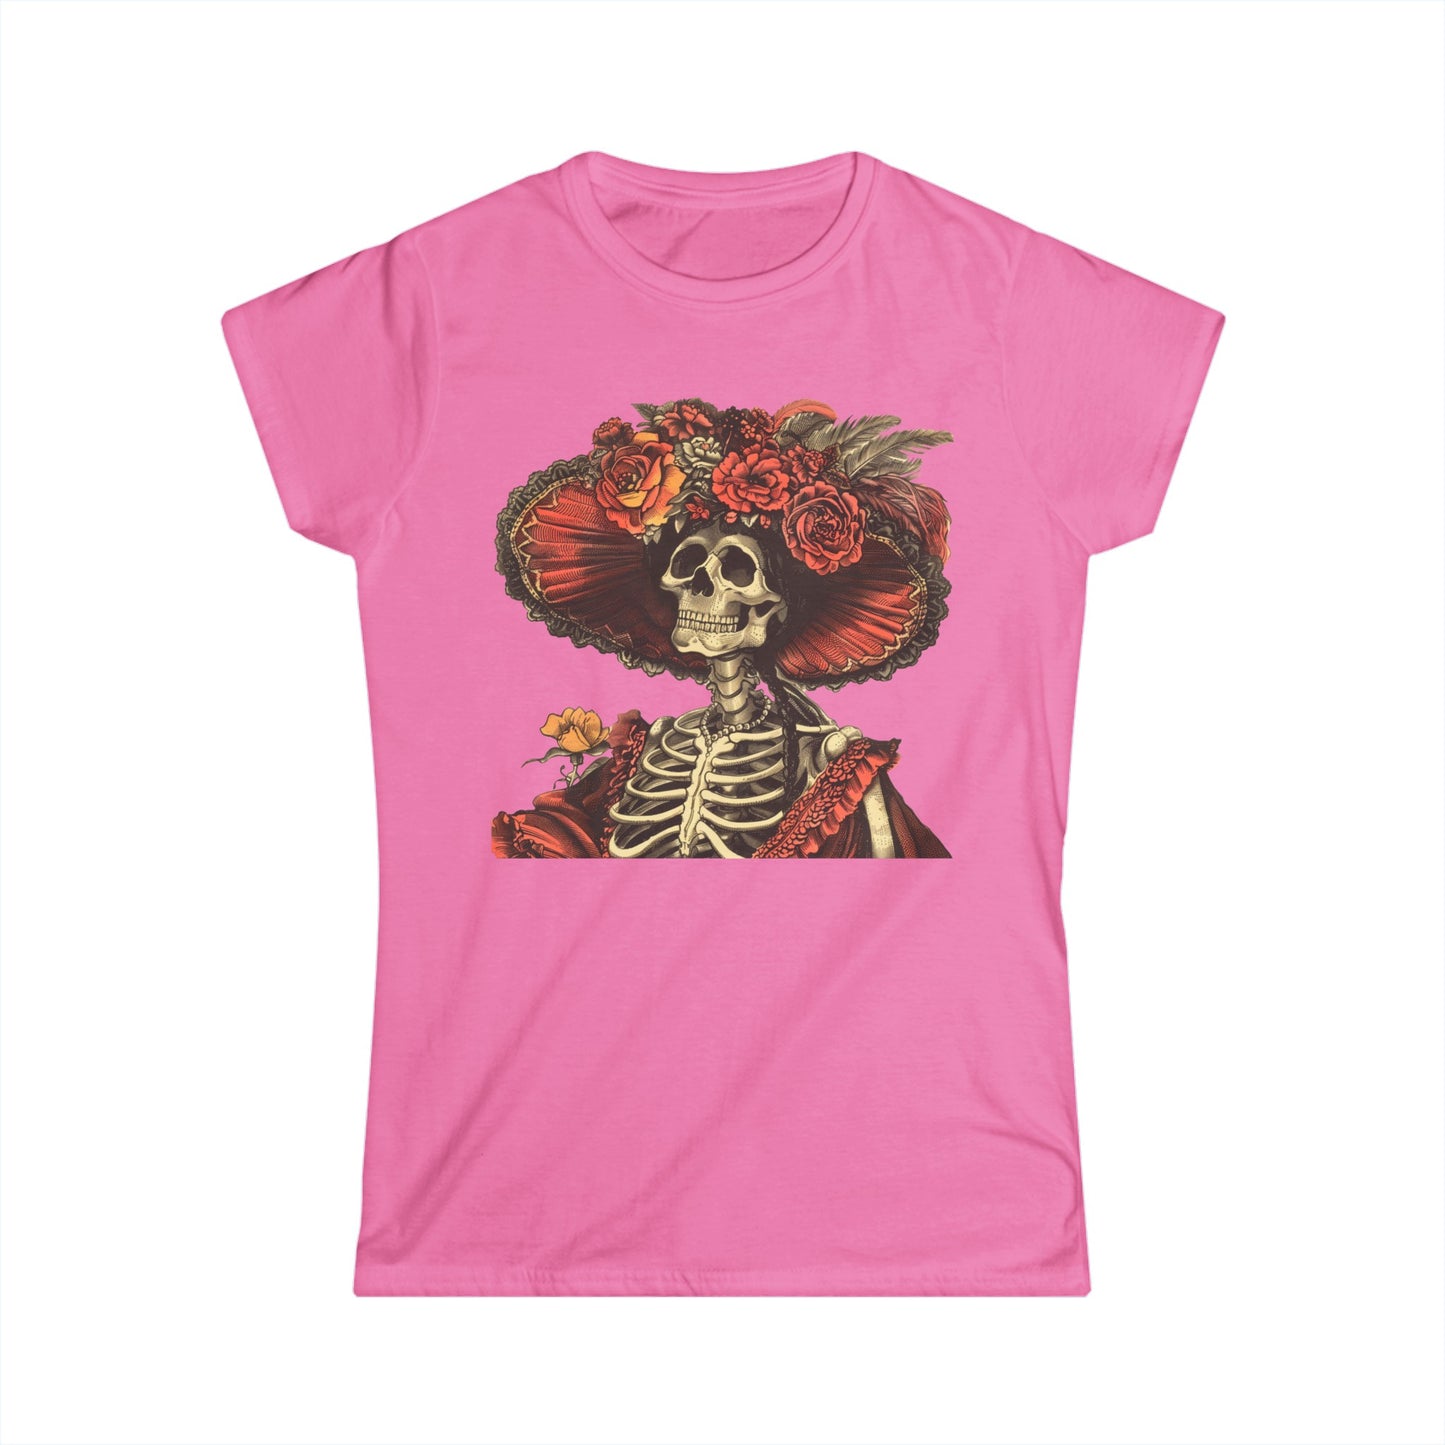 Women's Skeleton Lady Catrina Inspired Day of the Dead Softstyle Tee by Casita De Los Muertos